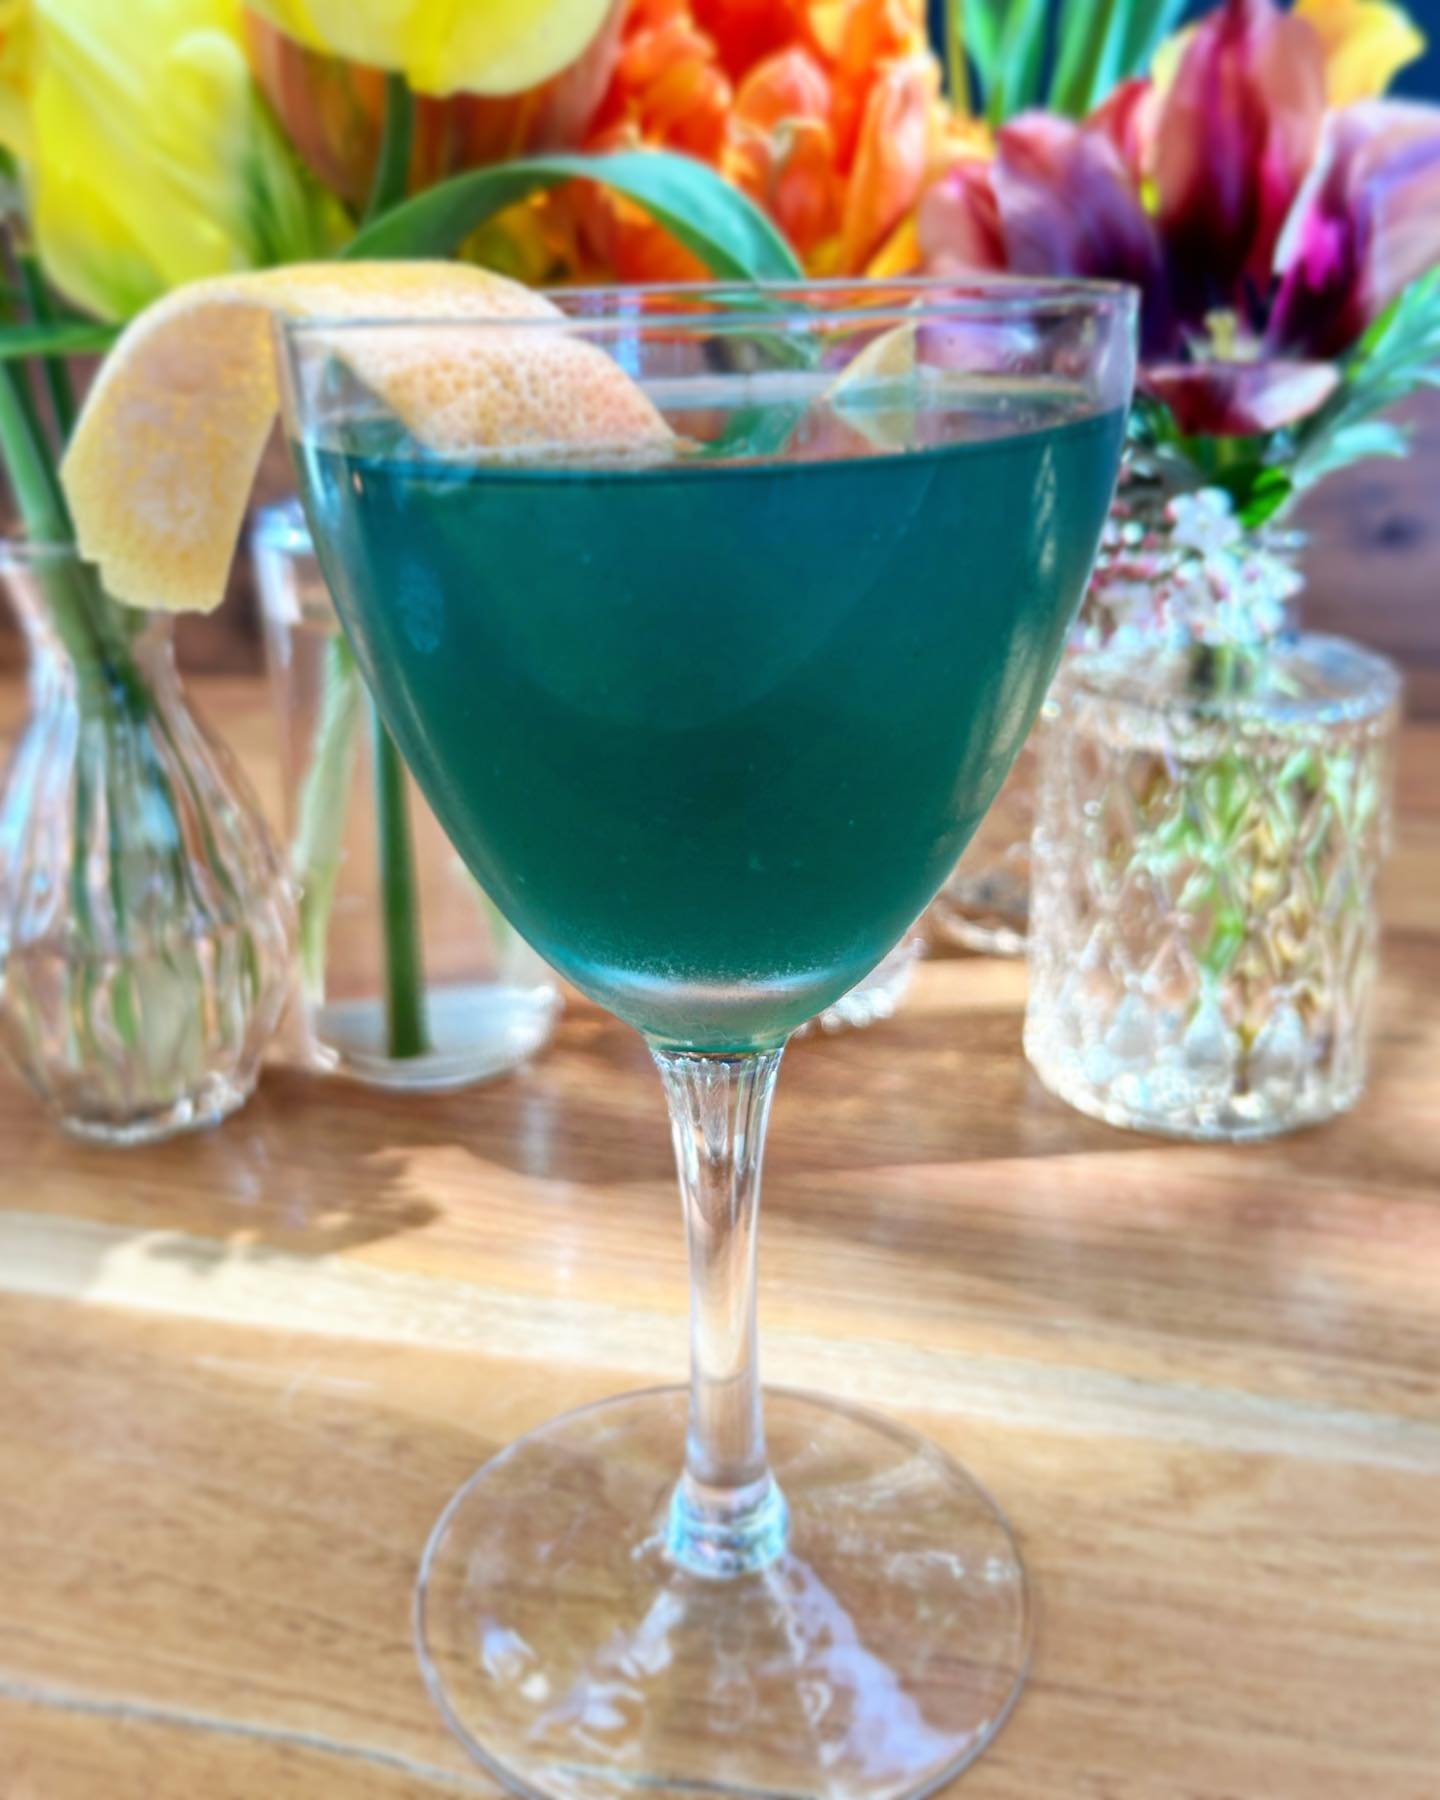 🔔 DRINK &amp; DONATE 🔔 Come try our teal MAJIK DAIQUIRI and support Sexual Assault Awareness Month at the same time! For the rest of April a portion of the proceeds from this cocktail will be donated to @stacarecenter who tirelessly help support su